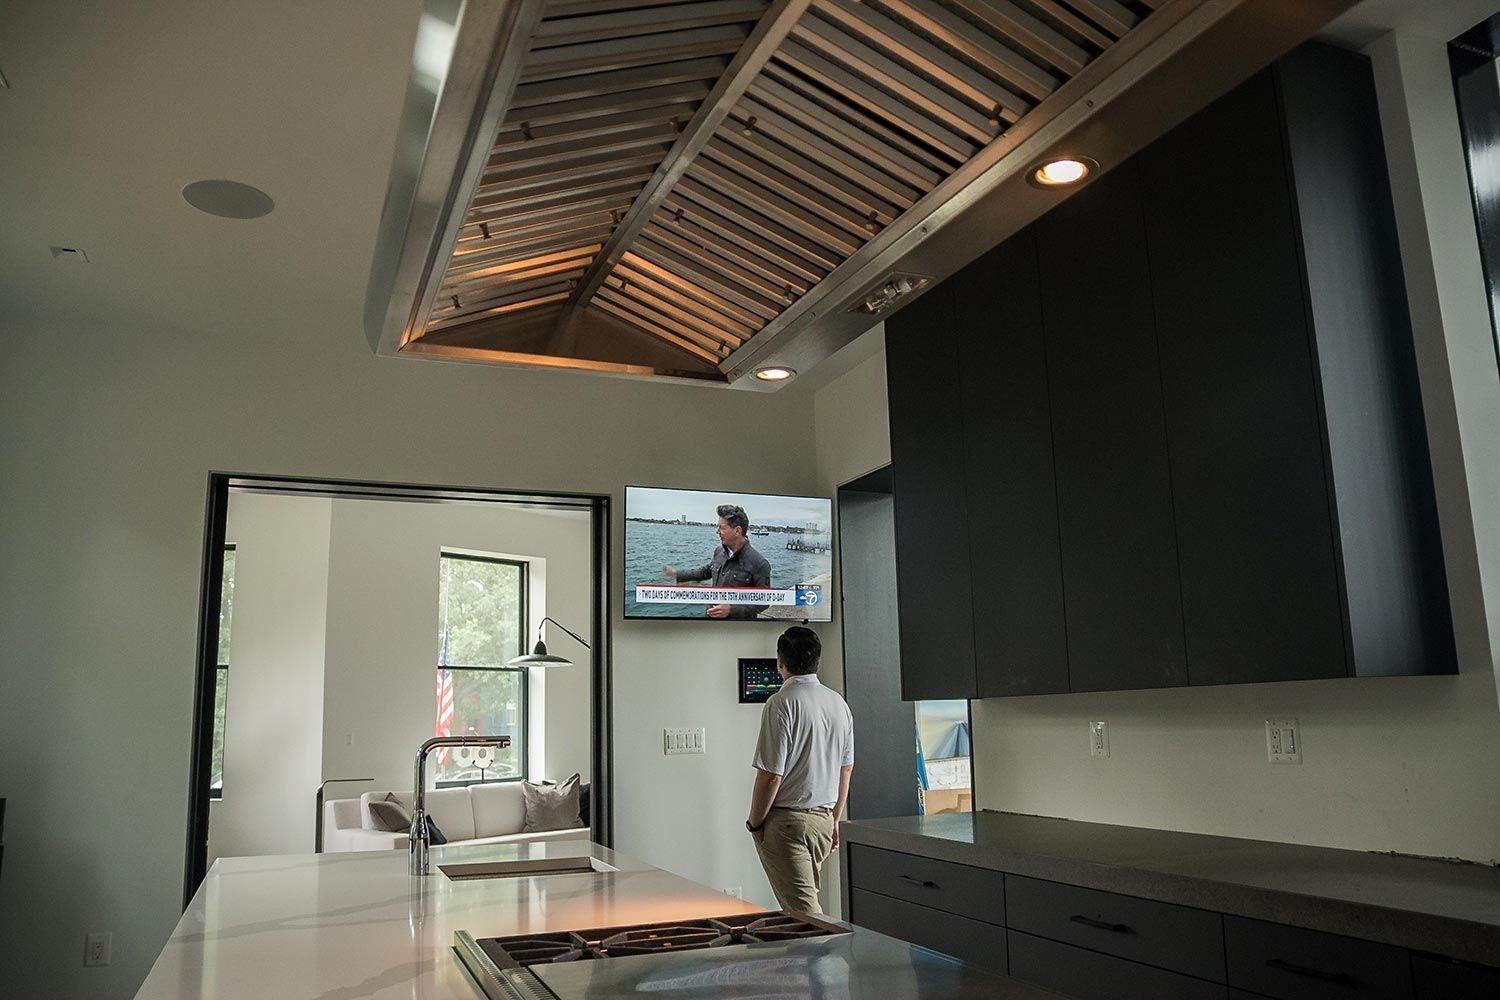 Kitchen TV, with Lighting and Audio Control Control